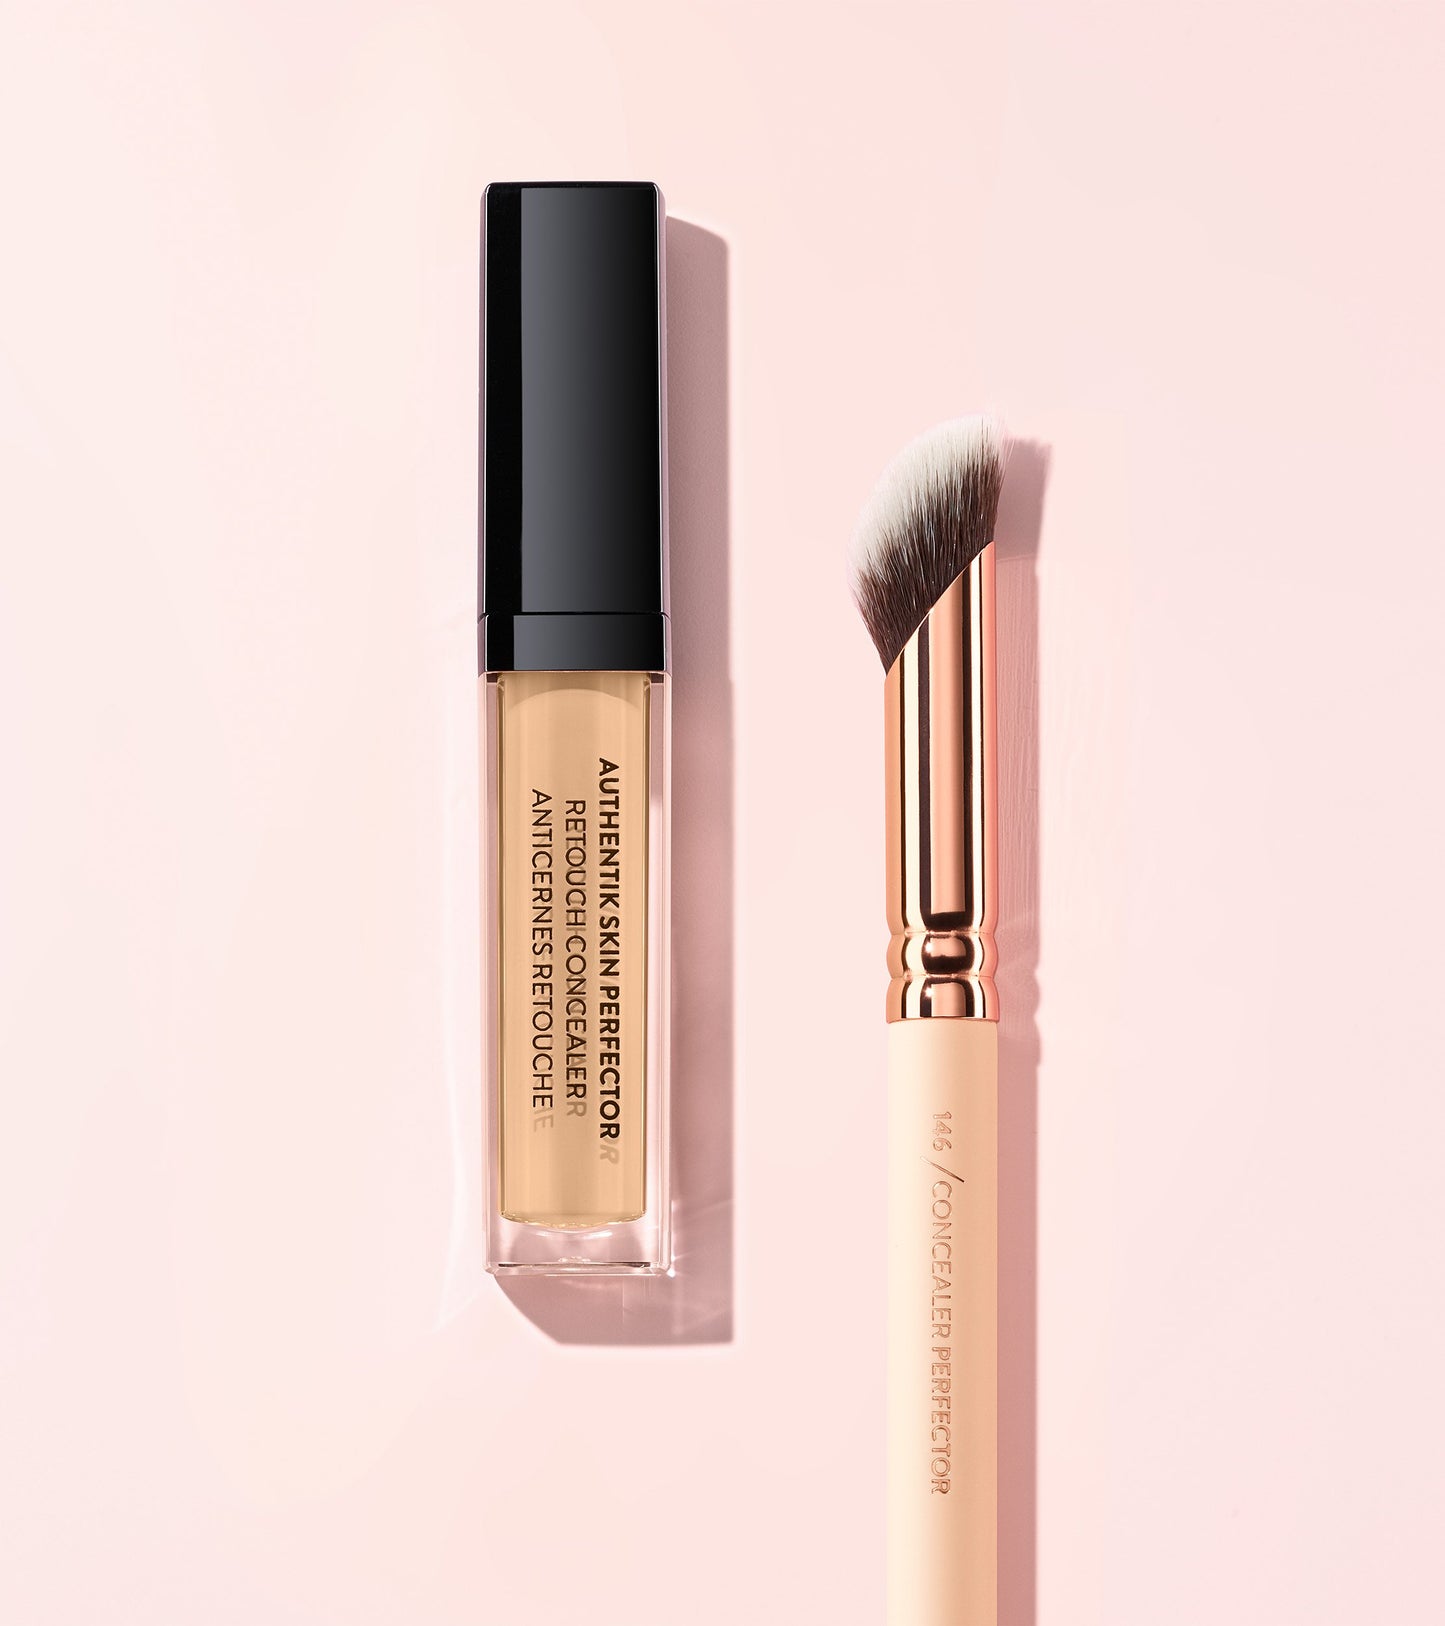 AUTHENTIK SKIN PERFECTOR CONCEALER (150 INCARNATE) Expanded Image 3